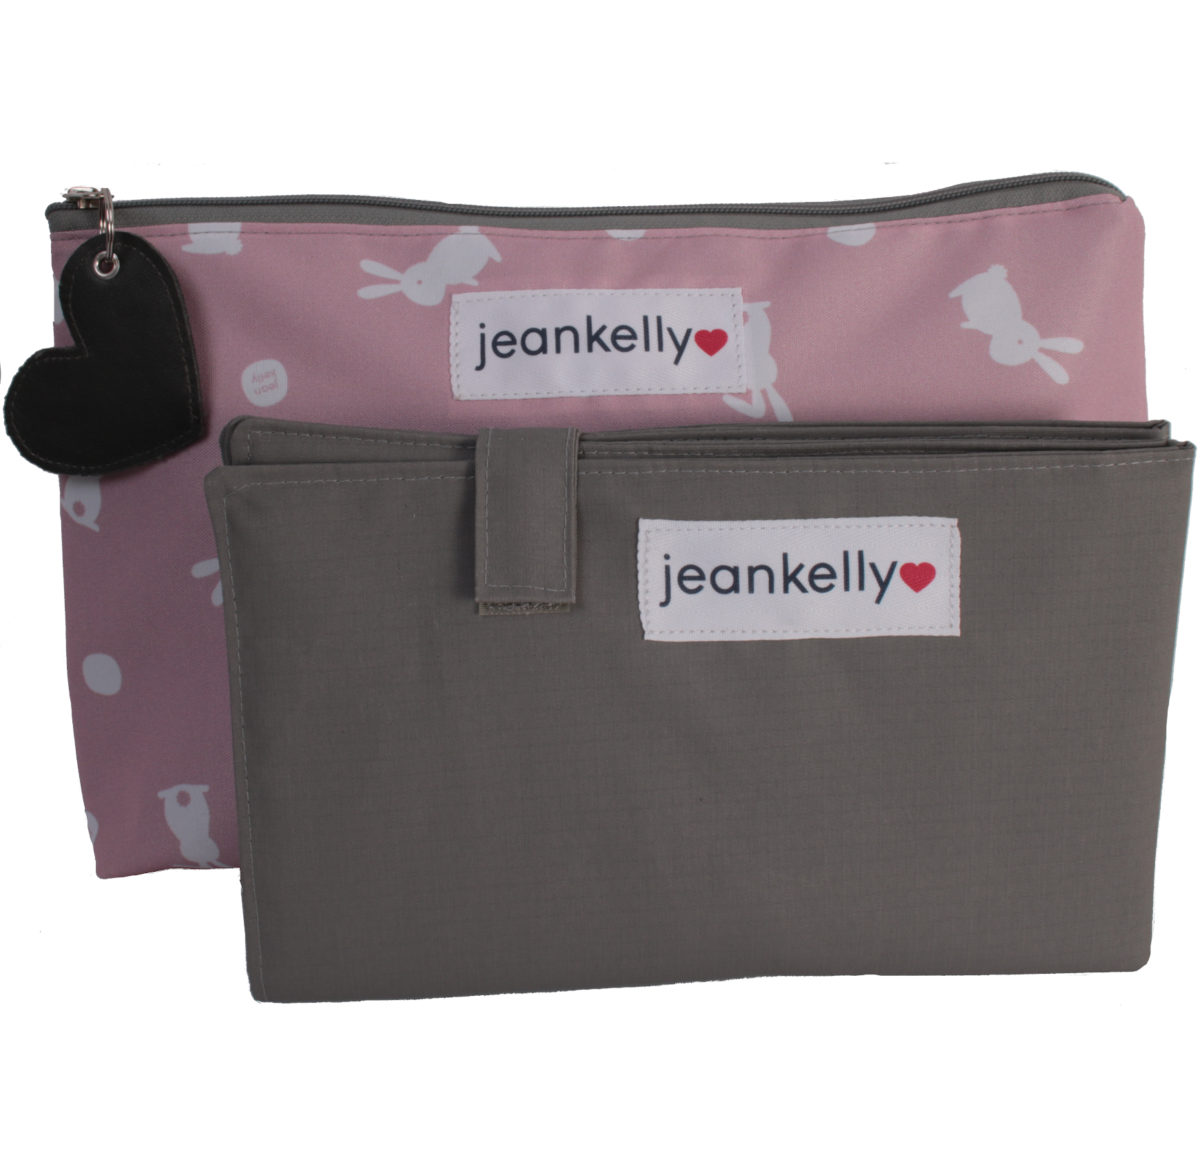 jeankelly_pouch pink and grey